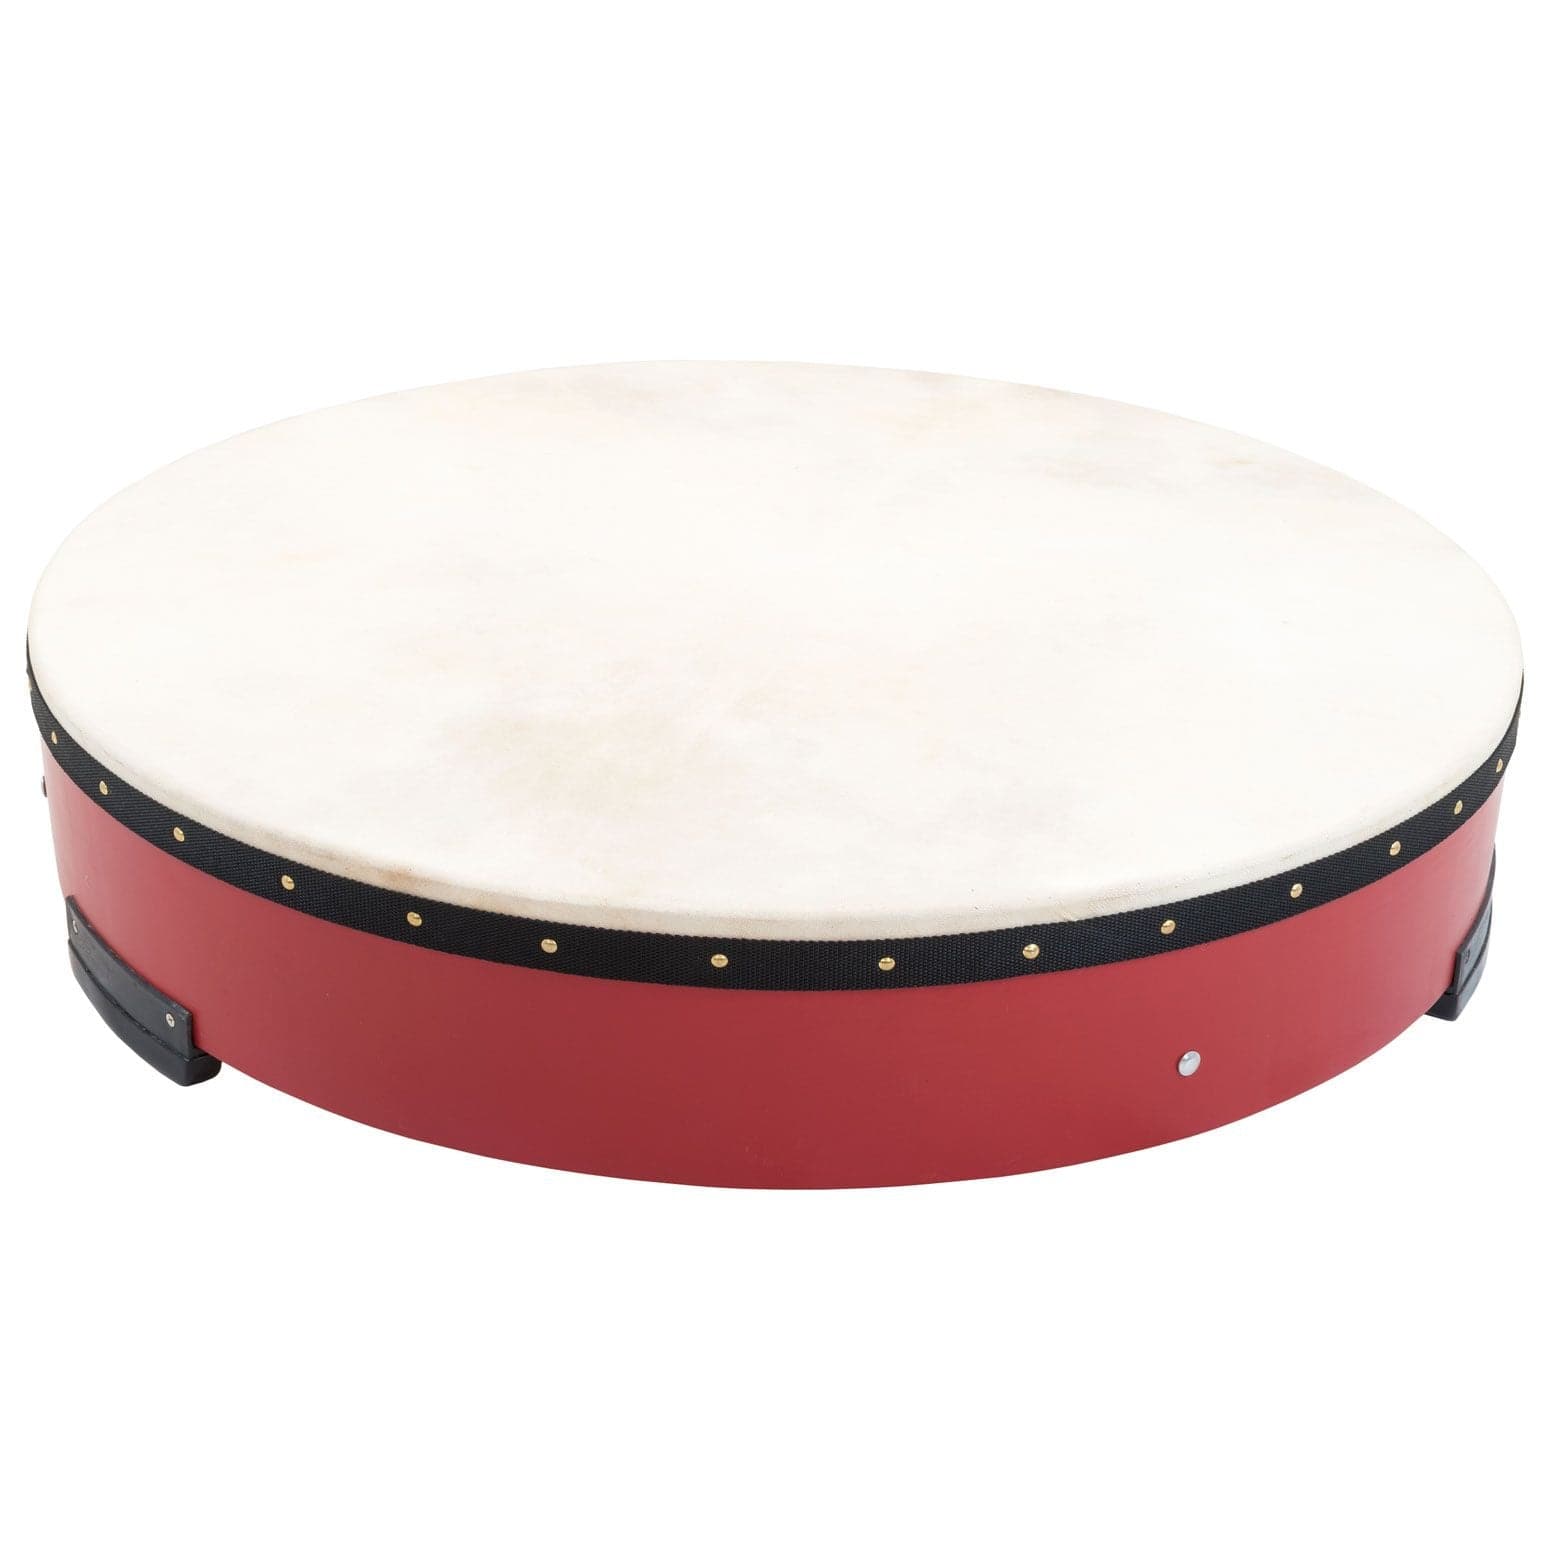 Gathering Drum, The Gathering Drum is an exceptional group percussion instrument that brings people together in rhythm and harmony. With its impressive features, this drum is sure to be a hit at gatherings, drum circles, and musical events. Here's what you need to know: Large and Inclusive: This drum is generously sized, making it suitable for group play. It can comfortably accommodate 3-4 people, allowing friends and musicians to gather around and create captivating rhythms together. Quality Craftsmanship: